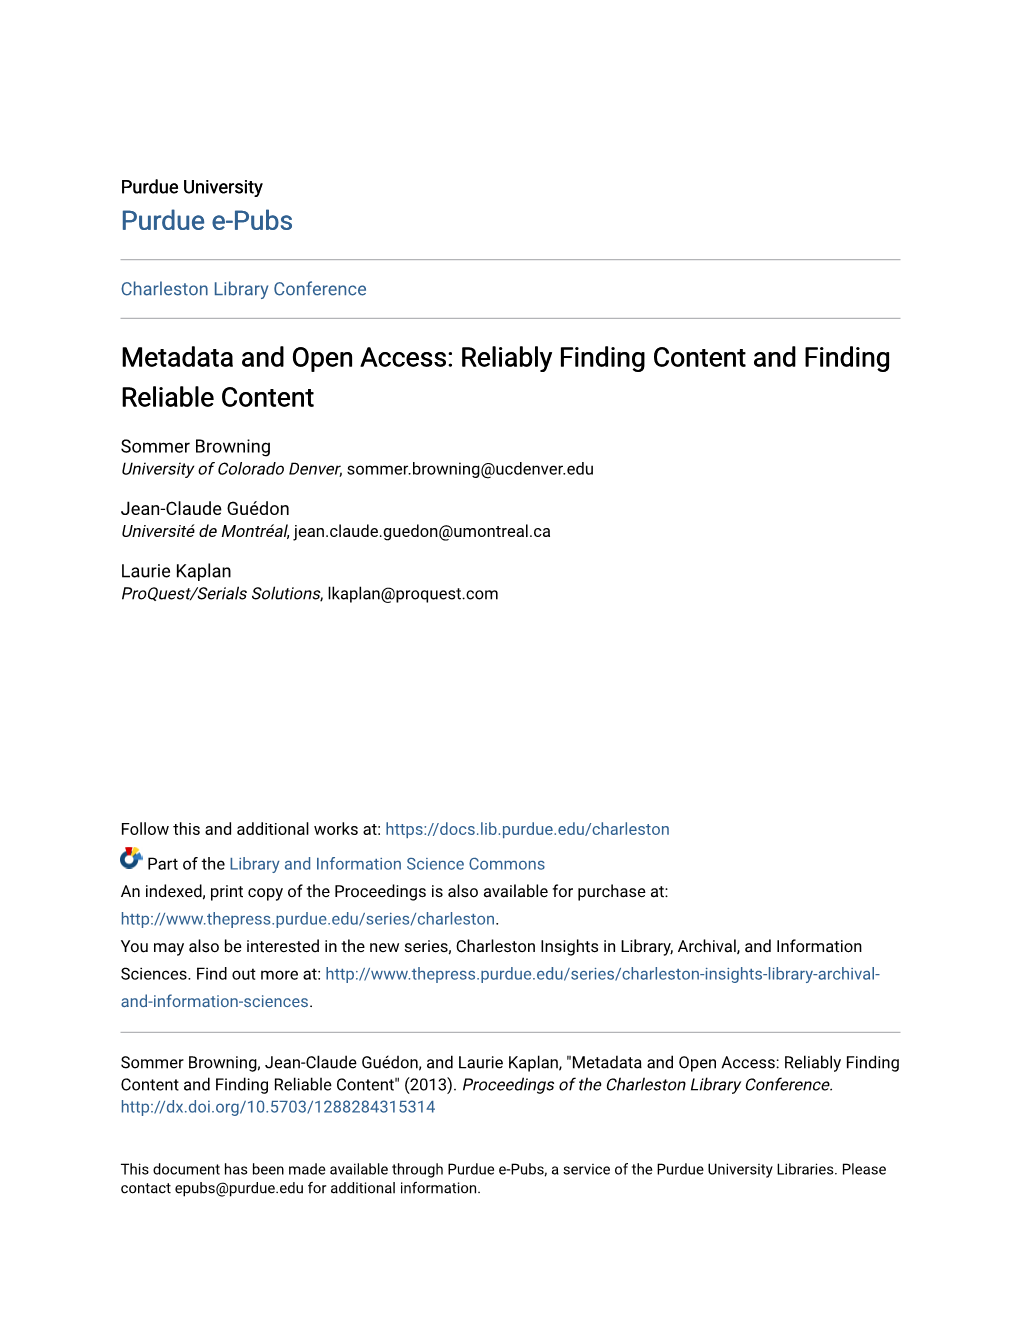 Metadata and Open Access: Reliably Finding Content and Finding Reliable Content